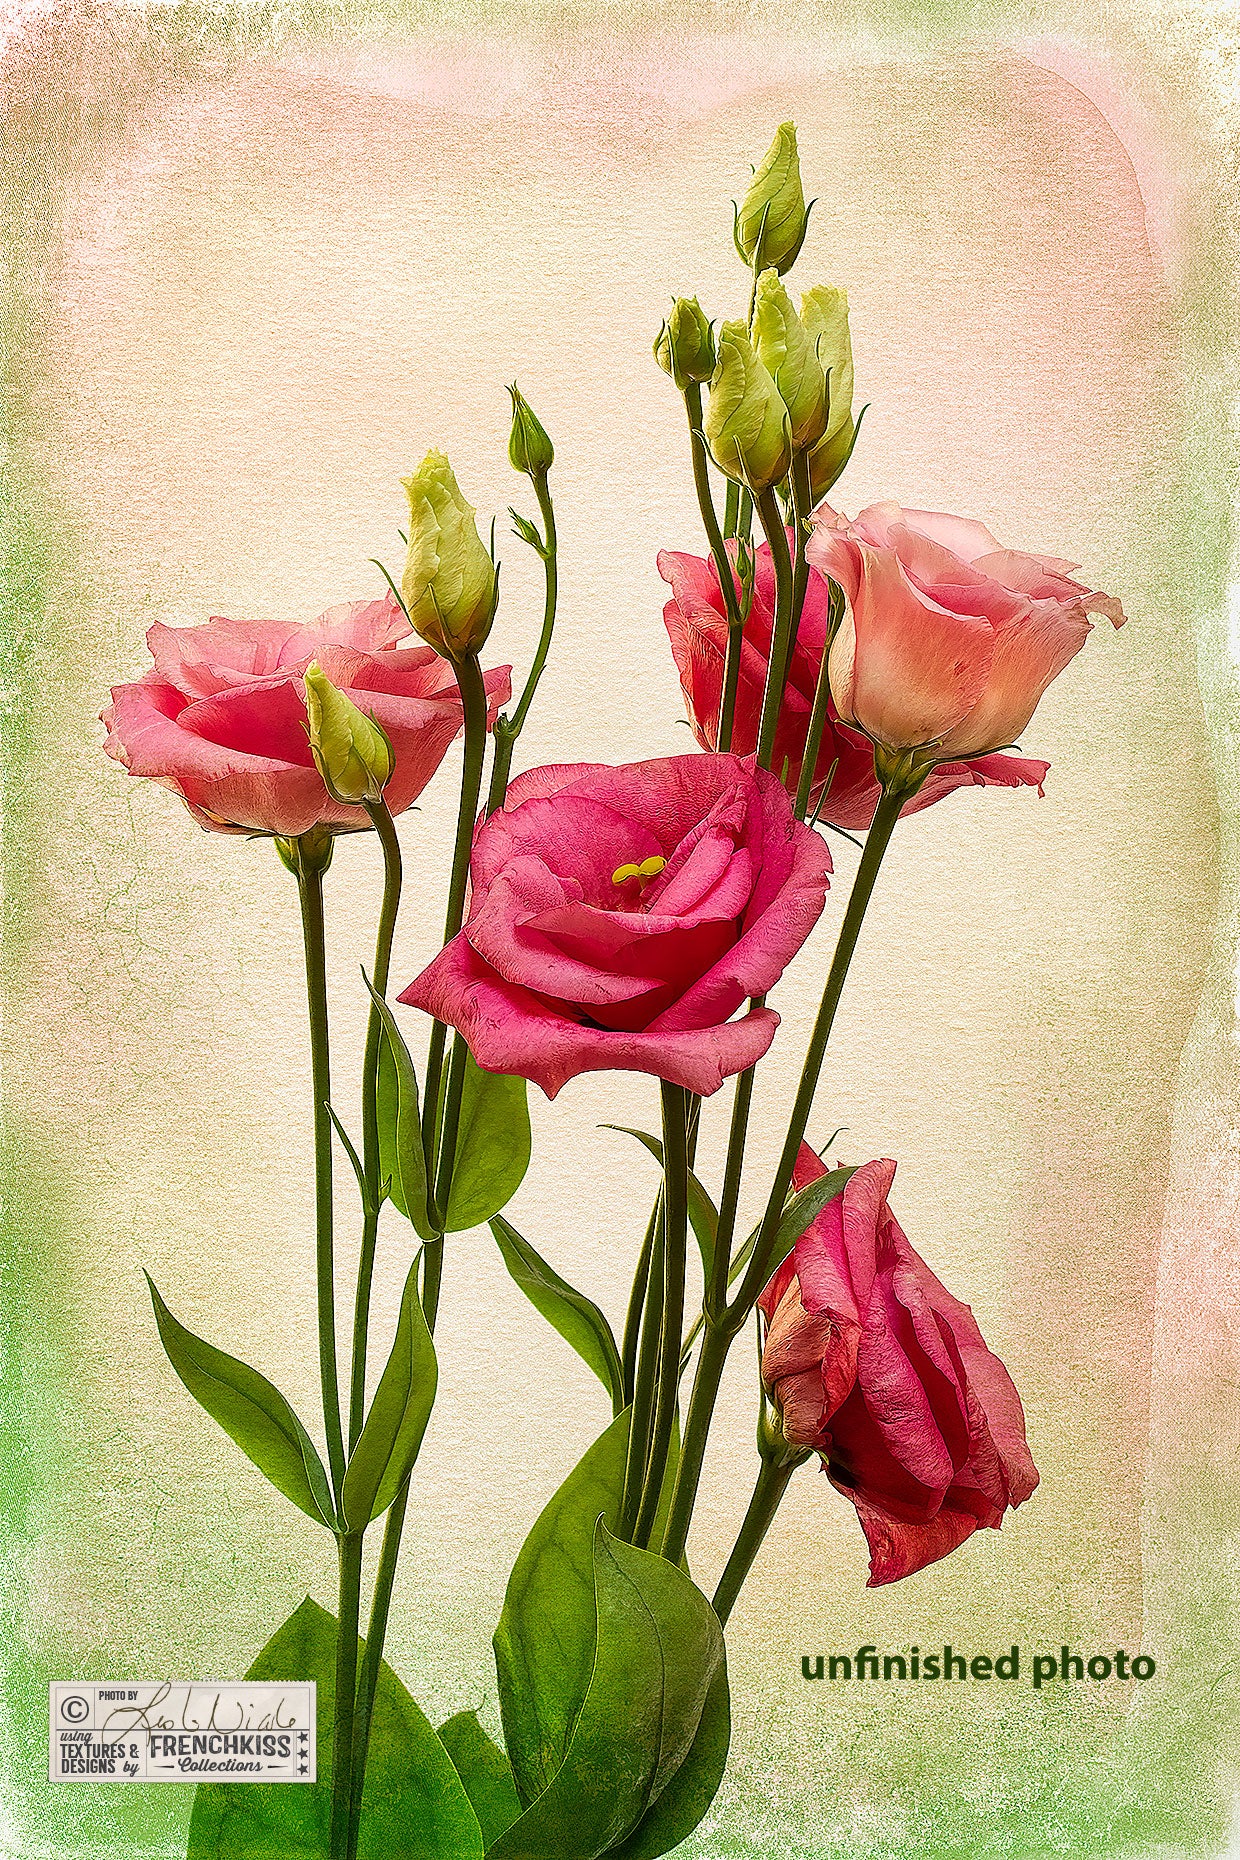 Round 1 edits for this Lisianthus flowers photograph with textures and filters.